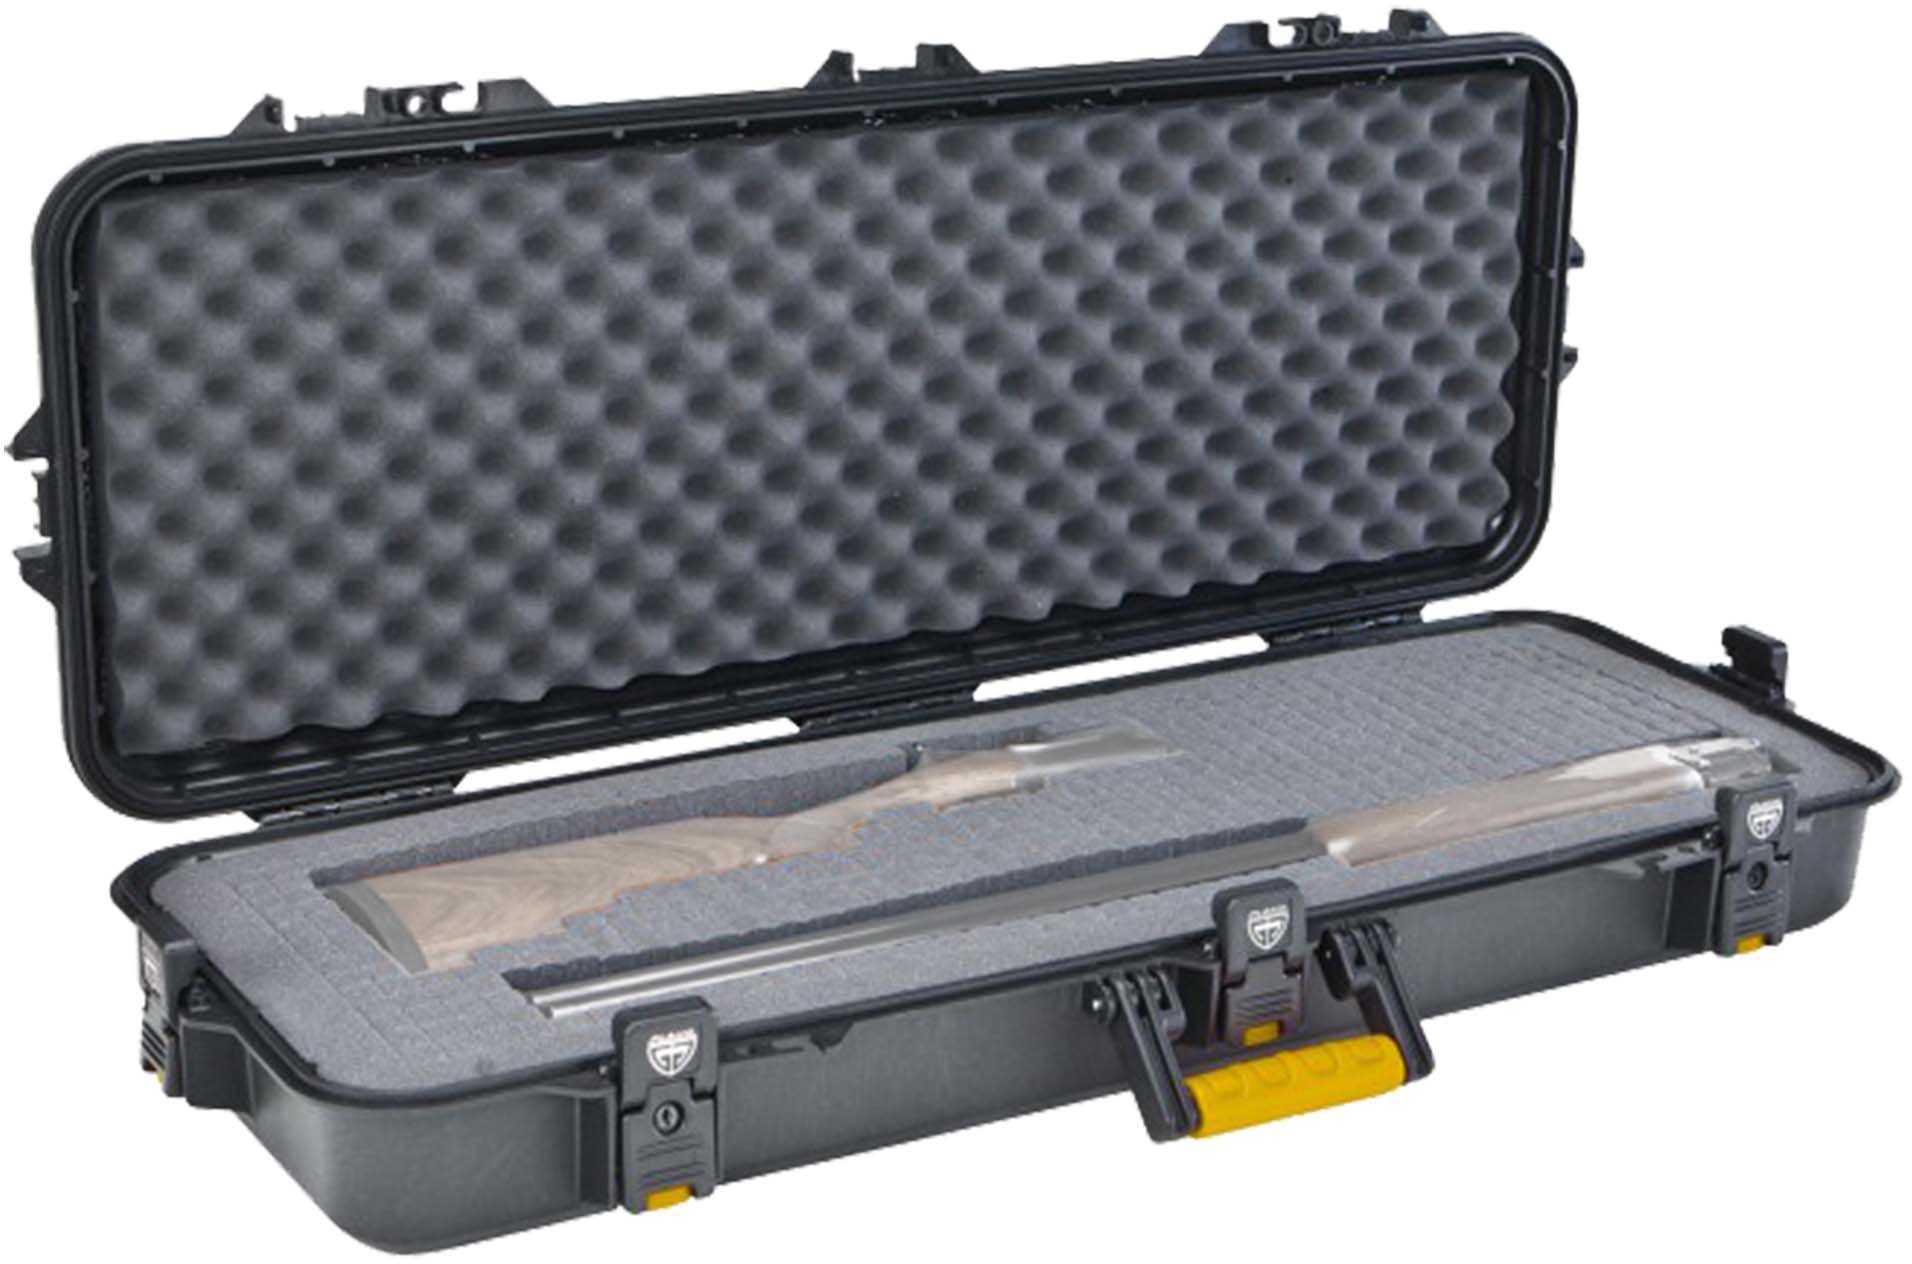 Doskosport Gun Guard All-Weather 36" Case Interior: X 13" 5" - Perfect Size For Black Guns And Take-Downs We